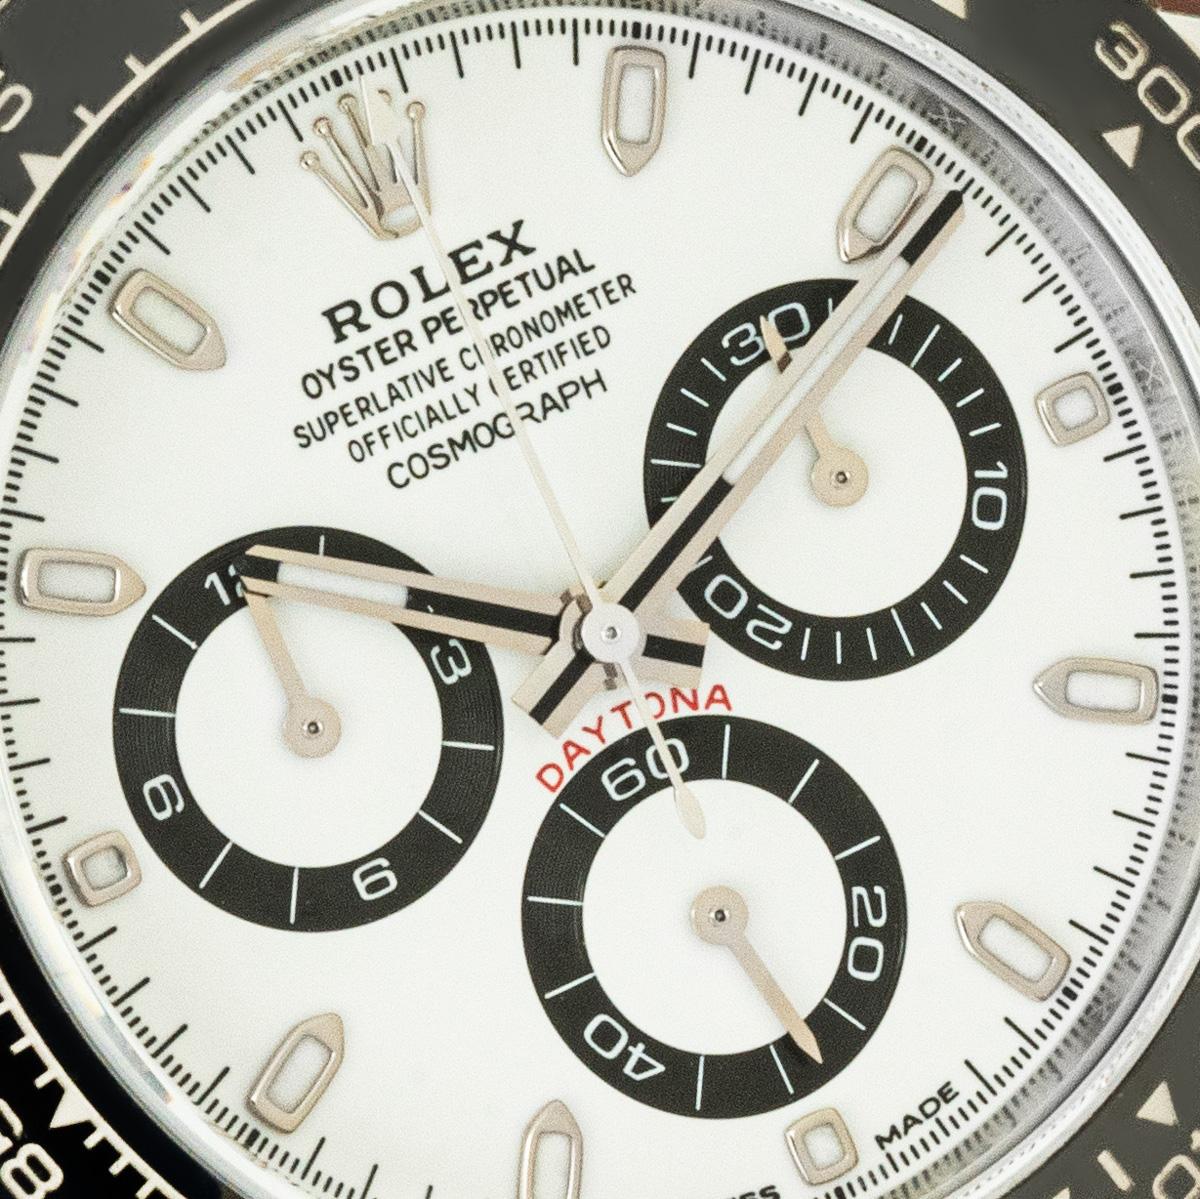 Rolex Daytona White Dial 116500LN In Excellent Condition For Sale In London, GB